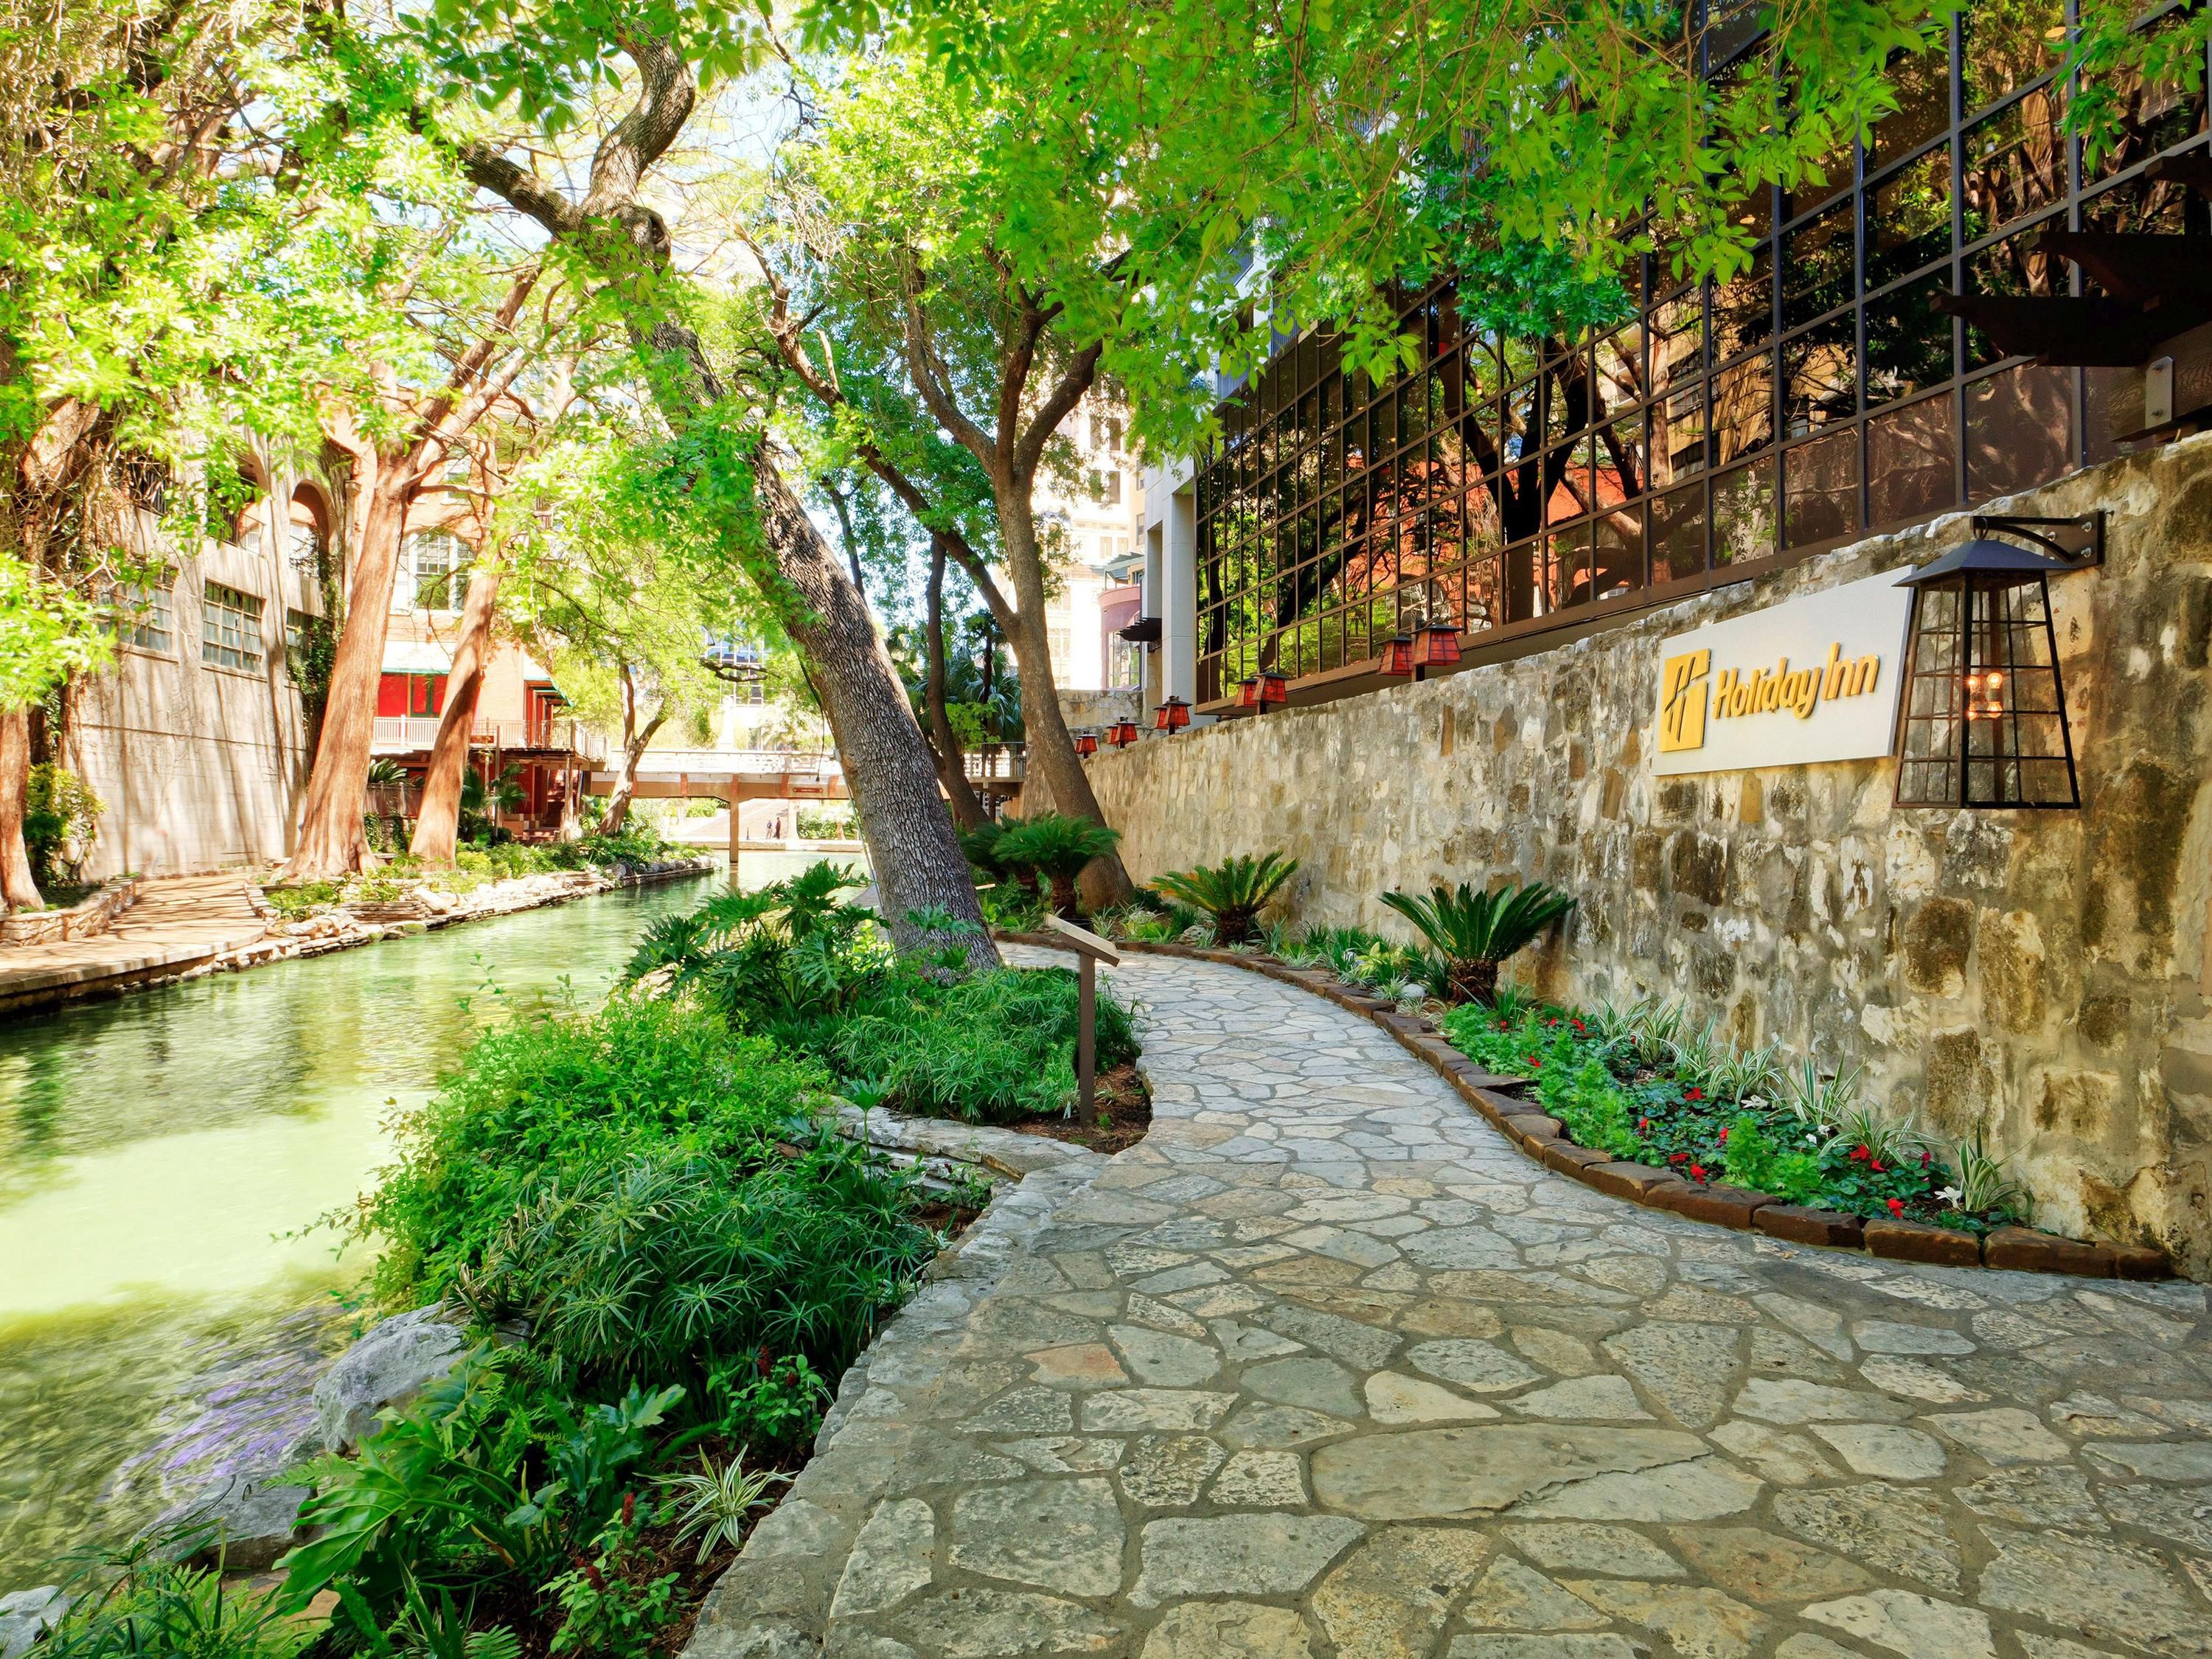 Experience the warm atmosphere and modern design of our hotel on the San Antonio River Walk. Stroll outside to the banks of the winding river and stroll along tree-lined paths dotted with restaurants, bars, shops, markets, and historic sites. Explore the festive ambiance of San Antonio's most famous attraction.